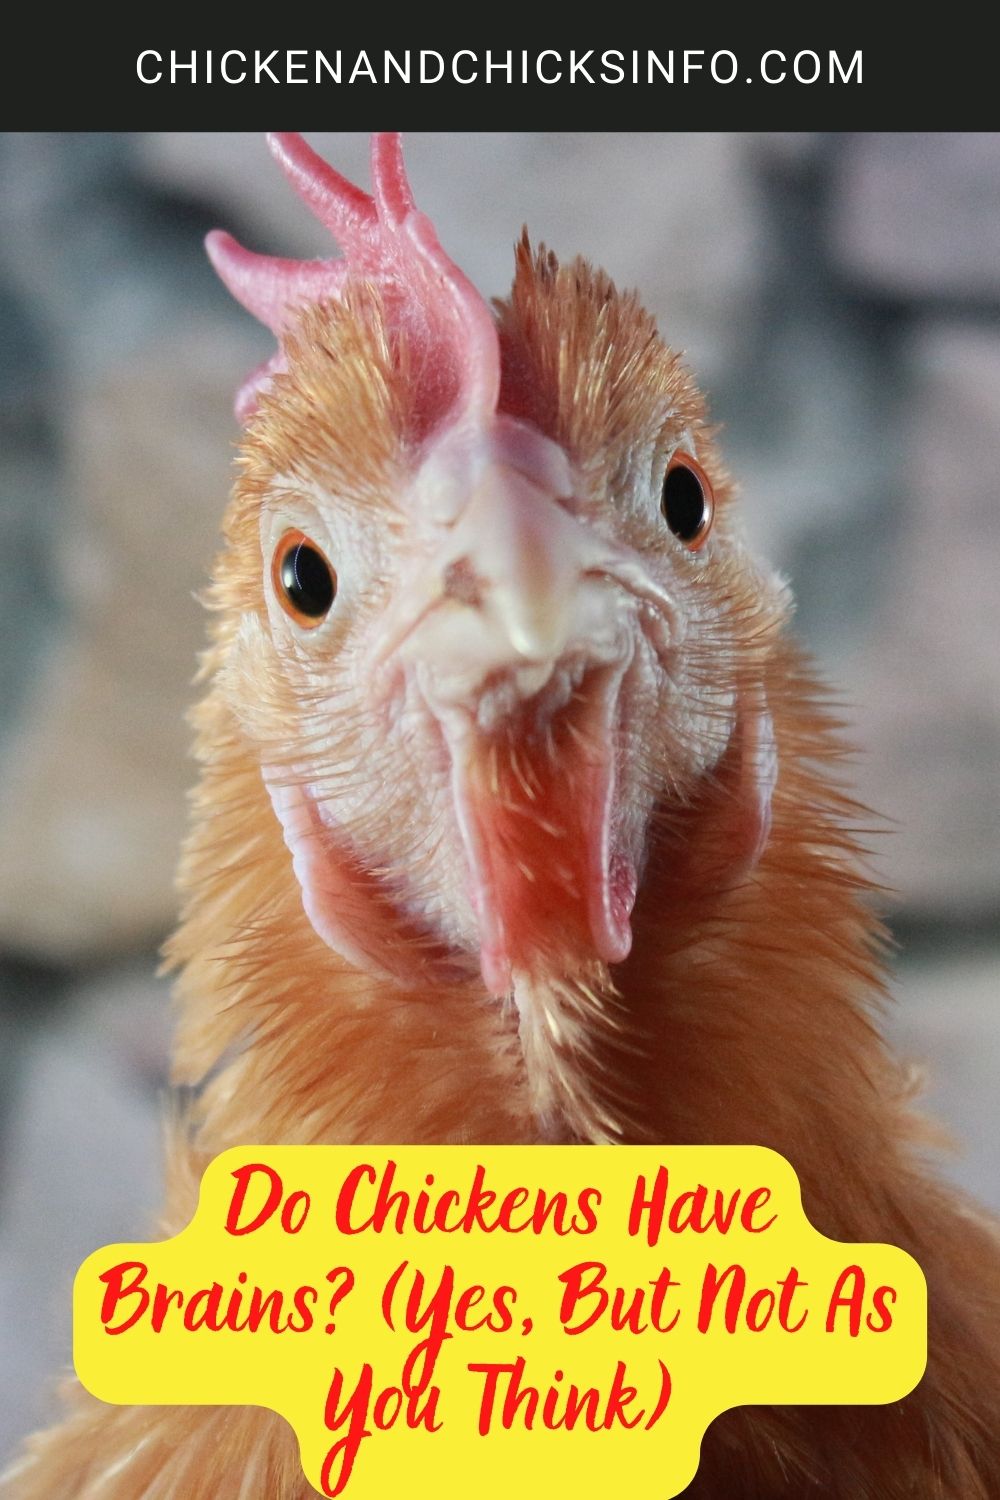 Do Chickens Have Brains? (Yes, But Not As You Think) poster.
